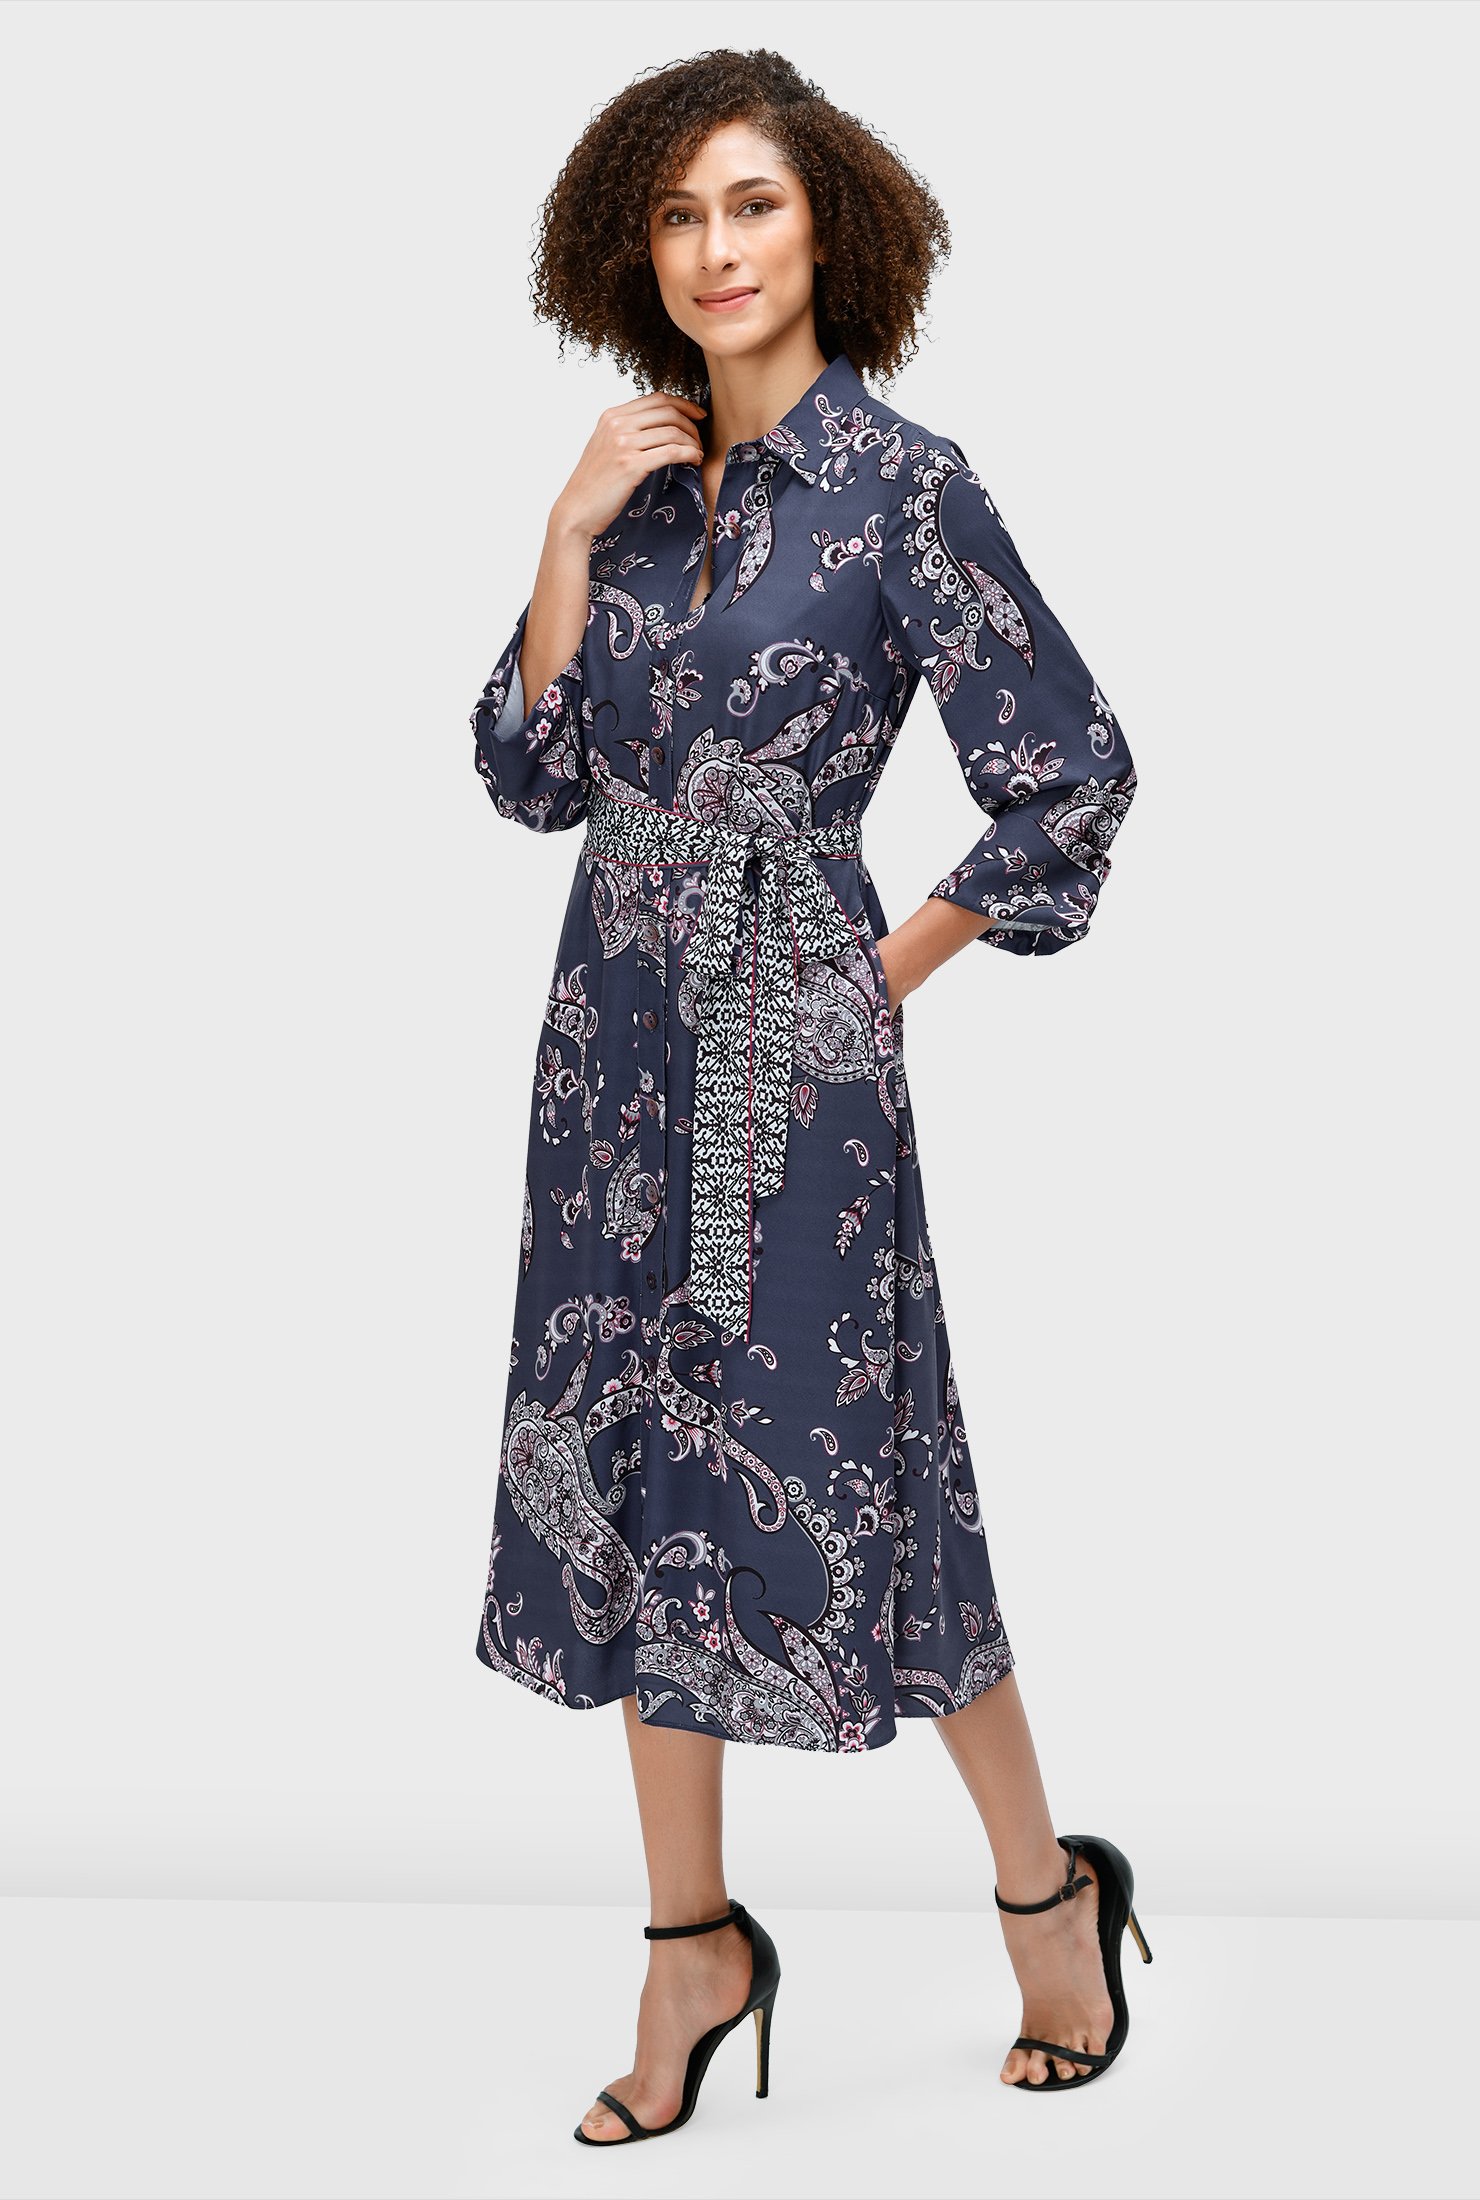 There's little out there that's better than our classic paisley print crepe shirtdress you can wear again and again and can be used all year long.